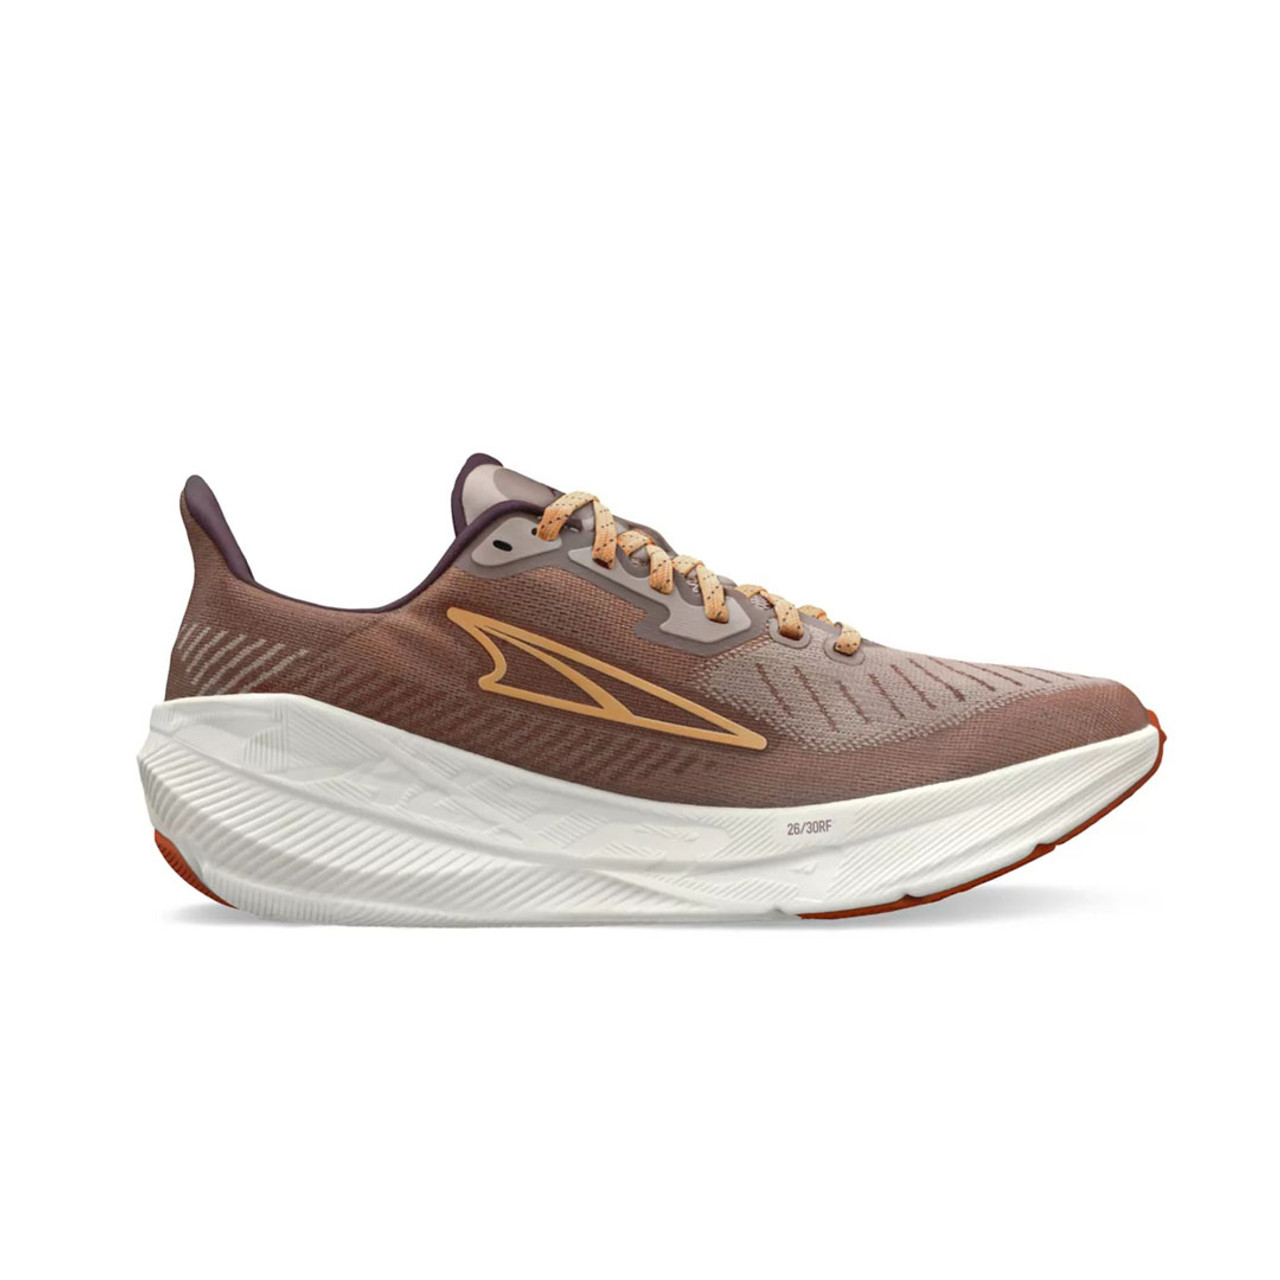 Altra Women's Experience Flow Road Running Shoes